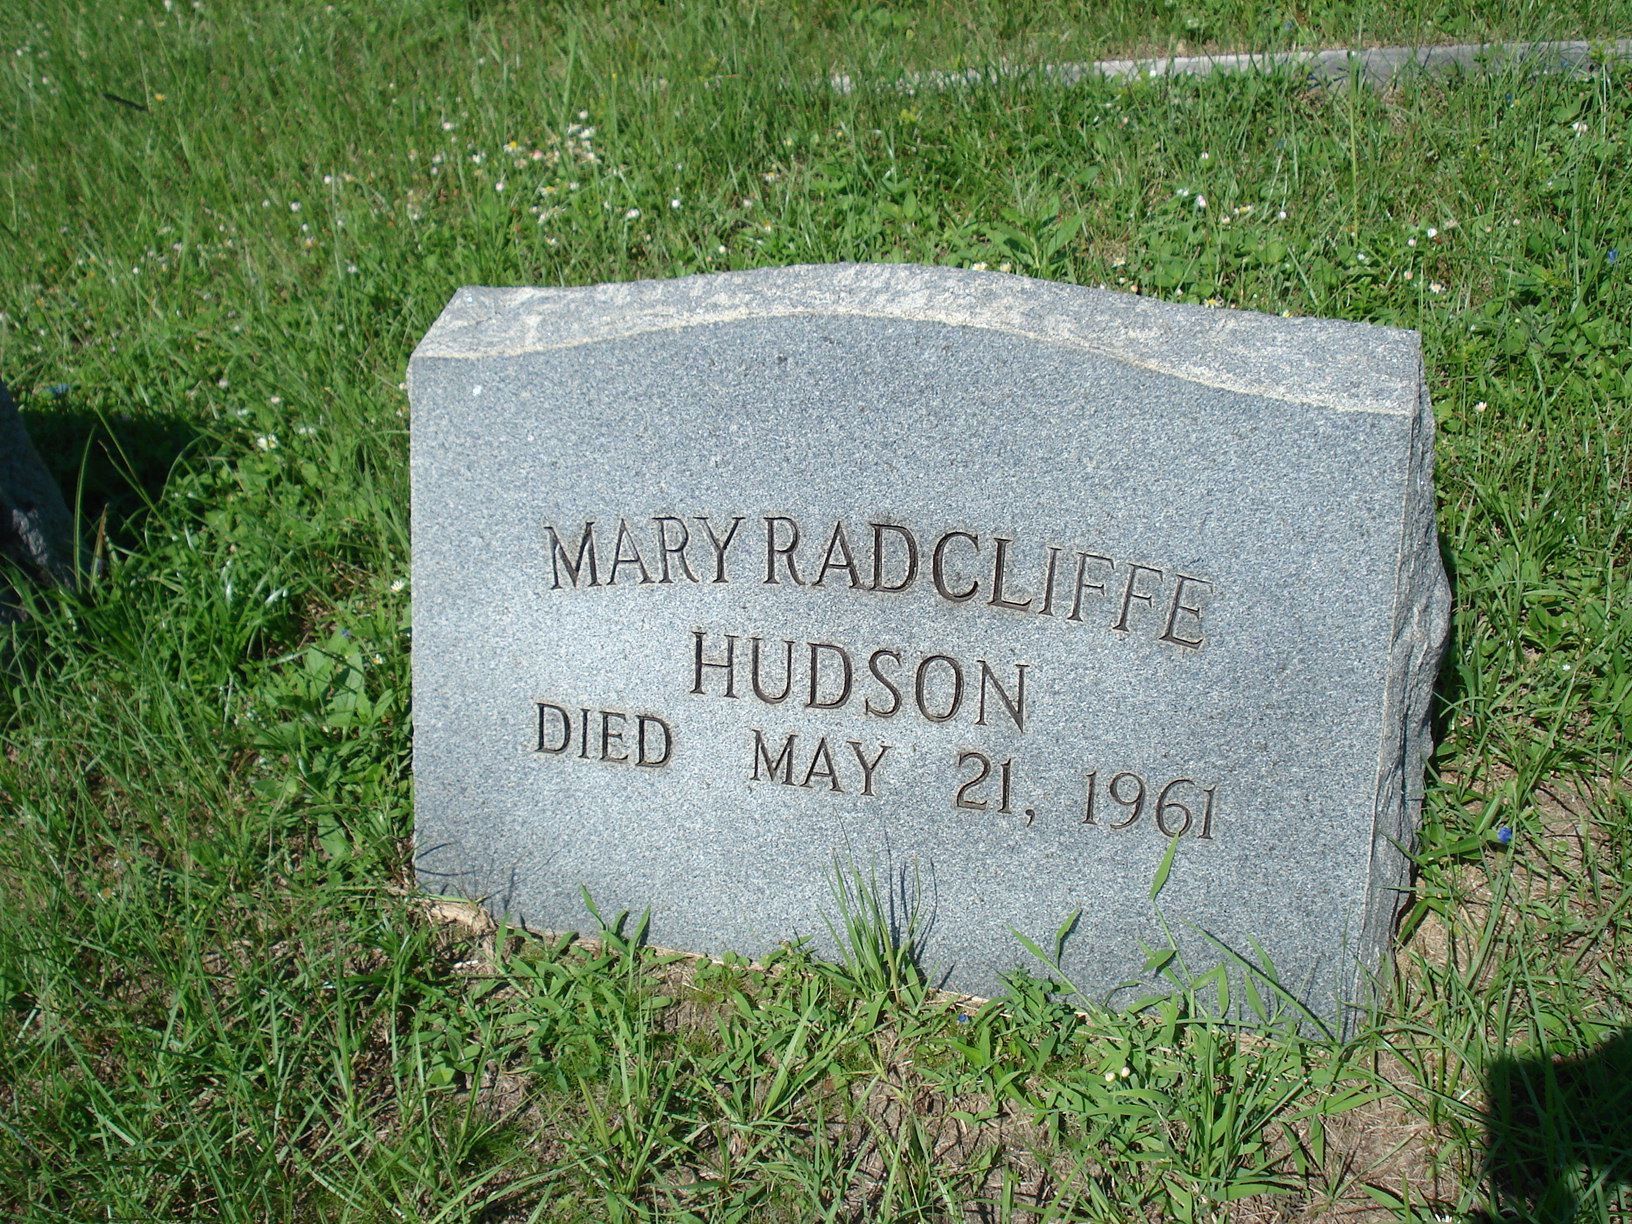 Mary Radcliffe Hudson